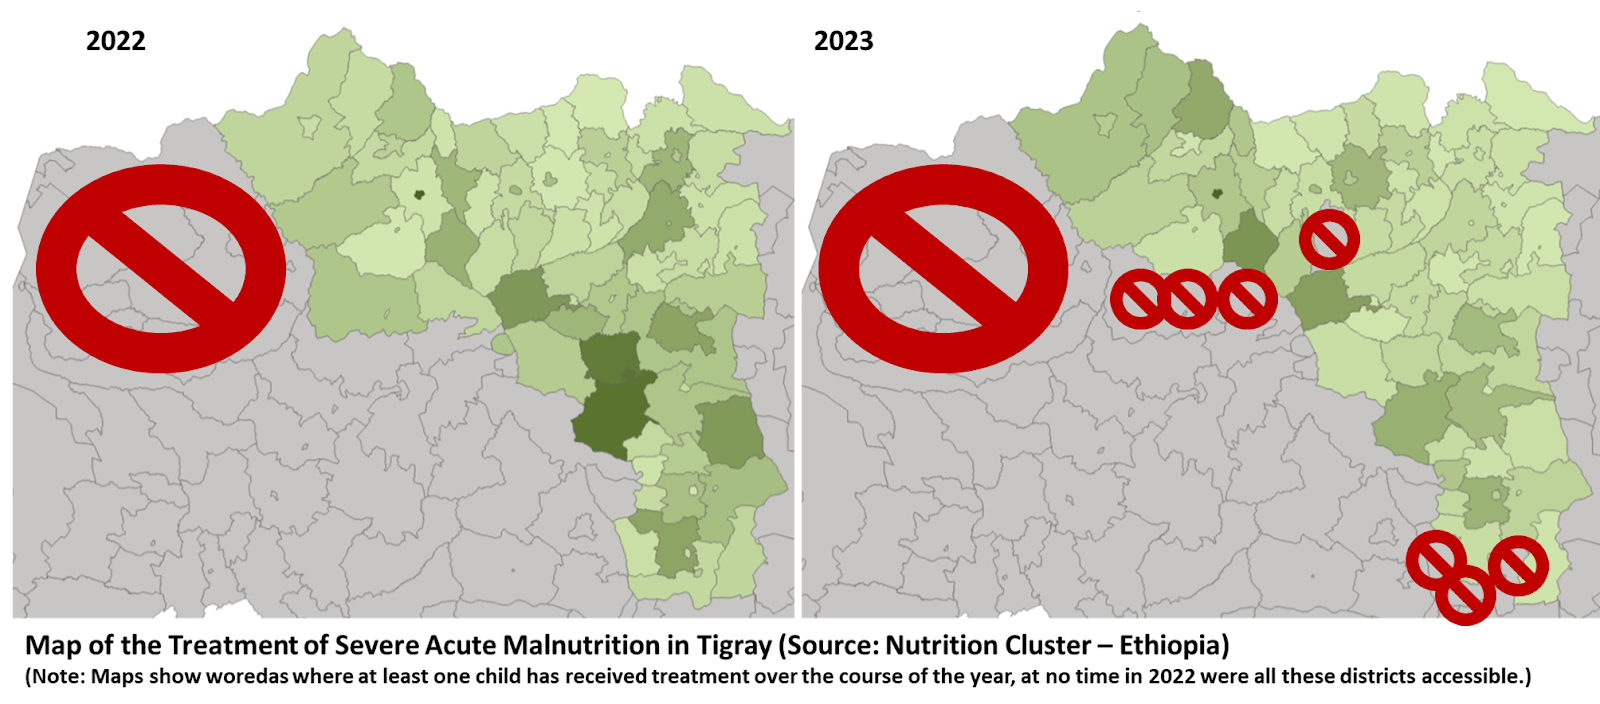 A map of tigray and its nutrition cluster

Description automatically generated